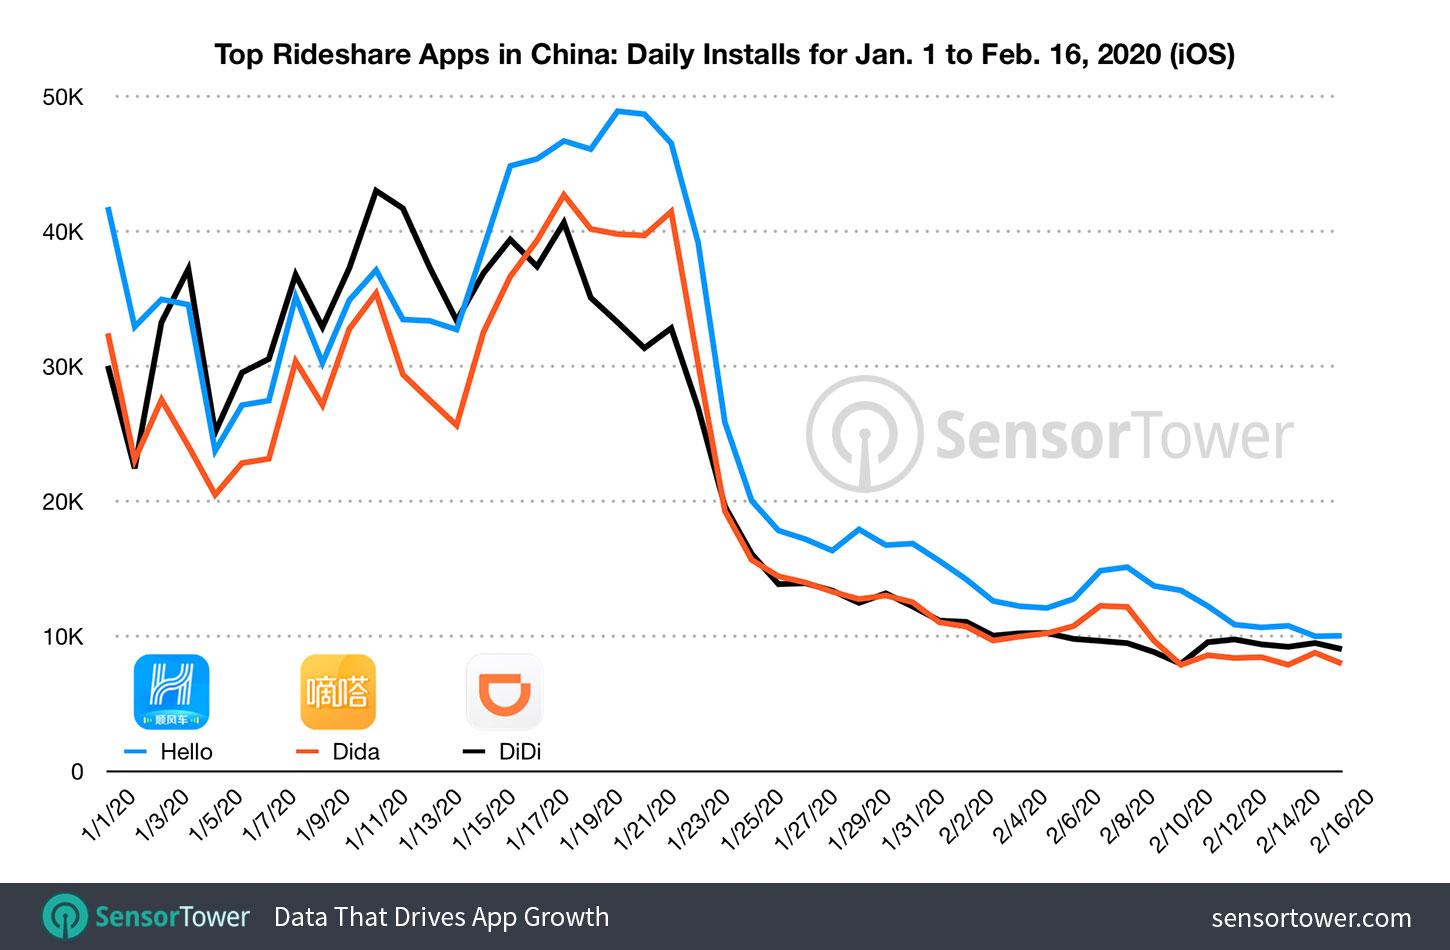 Top Rideshare App Downloads in China between January 1 and February 16, 2020